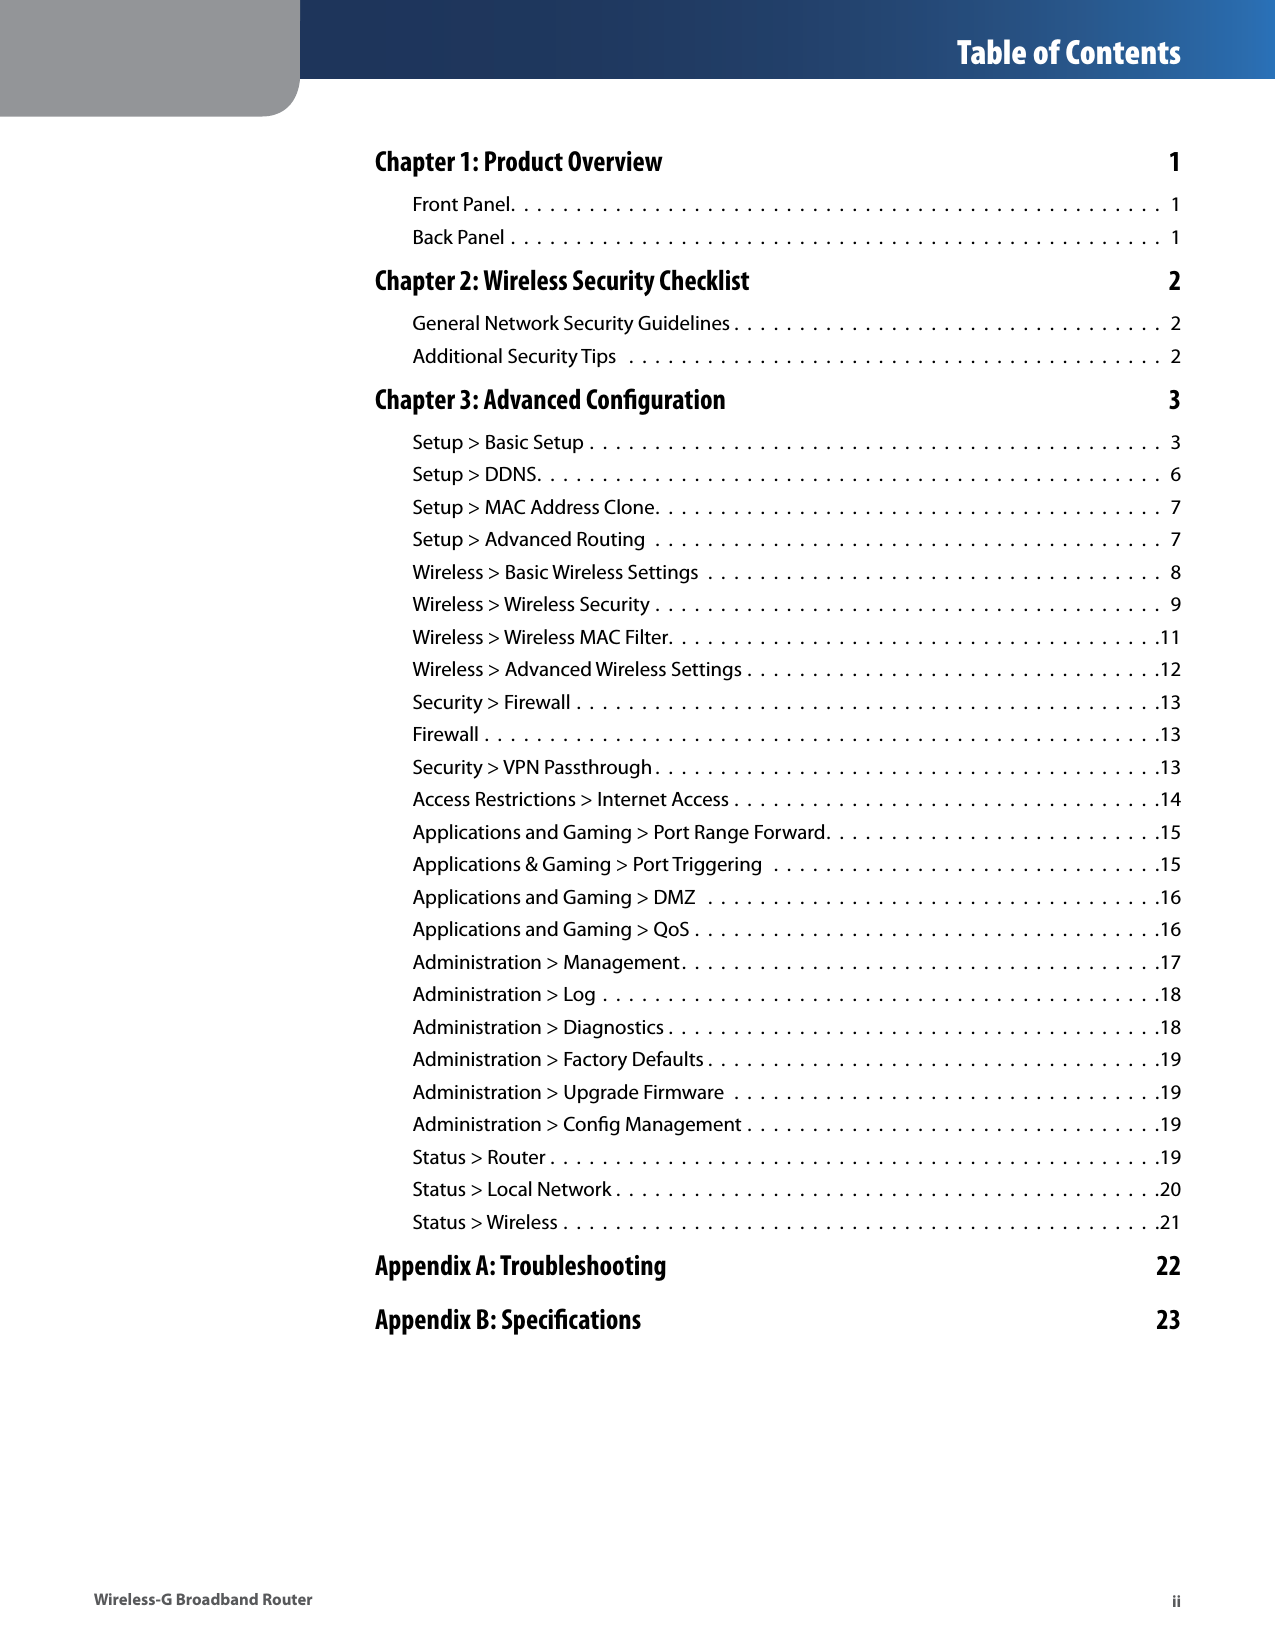  Table of Contents Chapter 1: Product Overview  1 Front Panel.................................................. 1 Back Panel .  .  .  .  .  .  .  .  .  .  .  .  .  .  .  .  .  .  .  .  .  .  .  .  .  .  .  .  .  .  .  .  .  .  .  .  .  .  .  .  .  .  .  .  .  .  .  .  .  .  1 Chapter 2: Wireless Security Checklist  2 General Network Security Guidelines . . . . . . . . . . . . . . . . . . . . . . . . . . . . . . . . .  2 Additional Security Tips  .  .  .  .  .  .  .  .  .  .  .  .  .  .  .  .  .  .  .  .  .  .  .  .  .  .  .  .  .  .  .  .  .  .  .  .  .  .  .  .  .  2 Chapter 3: Advanced Conguration  3 Setup &gt; Basic Setup .  .  .  .  .  .  .  .  .  .  .  .  .  .  .  .  .  .  .  .  .  .  .  .  .  .  .  .  .  .  .  .  .  .  .  .  .  .  .  .  .  .  .  .  3 Setup &gt; DDNS................................................ 6 Setup &gt; MAC Address Clone....................................... 7 Setup &gt; Advanced Routing  .  .  .  .  .  .  .  .  .  .  .  .  .  .  .  .  .  .  .  .  .  .  .  .  .  .  .  .  .  .  .  .  .  .  .  .  .  .  .  7 Wireless &gt; Basic Wireless Settings  .  .  .  .  .  .  .  .  .  .  .  .  .  .  .  .  .  .  .  .  .  .  .  .  .  .  .  .  .  .  .  .  .  .  .  8 Wireless &gt; Wireless Security .  .  .  .  .  .  .  .  .  .  .  .  .  .  .  .  .  .  .  .  .  .  .  .  .  .  .  .  .  .  .  .  .  .  .  .  .  .  .  9 Wireless &gt; Wireless MAC Filter. .  . .  . . . . .  . .  . . .  . .  . . . . .  . .  . . .  . .  . . . . .  . .  . . .11 Wireless &gt; Advanced Wireless Settings .  .  .  .  .  .  .  .  .  .  .  .  .  .  .  .  .  .  .  .  .  .  .  .  .  .  .  .  .  .  .  .12 Security &gt; Firewall .  .  .  .  .  .  .  .  .  .  .  .  .  .  .  .  .  .  .  .  .  .  .  .  .  .  .  .  .  .  .  .  .  .  .  .  .  .  .  .  .  .  .  .  .13 Firewall .  .  .  .  .  .  .  .  .  .  .  .  .  .  .  .  .  .  .  .  .  .  .  .  .  .  .  .  .  .  .  .  .  .  .  .  .  .  .  .  .  .  .  .  .  .  .  .  .  .  .  .13 Security &gt; VPN Passthrough . . .  . .  . . . . .  . .  . . .  . .  . . . . .  . .  . . .  . .  . . . . .  . .  . . .13 Access Restrictions &gt; Internet Access .  .  .  .  .  .  .  .  .  .  .  .  .  .  .  .  .  .  .  .  .  .  .  .  .  .  .  .  .  .  .  .  .14 Applications and Gaming &gt; Port Range Forward.  .  .  .  .  .  .  .  .  .  .  .  .  .  .  .  .  .  .  .  .  .  .  .  .  .15 Applications &amp; Gaming &gt; Port Triggering  .  .  .  .  .  .  .  .  .  .  .  .  .  .  .  .  .  .  .  .  .  .  .  .  .  .  .  .  .  .15 Applications and Gaming &gt; DMZ  .  .  .  .  .  .  .  .  .  .  .  .  .  .  .  .  .  .  .  .  .  .  .  .  .  .  .  .  .  .  .  .  .  .  .16 Applications and Gaming &gt; QoS .  .  .  .  .  .  .  .  .  .  .  .  .  .  .  .  .  .  .  .  .  .  .  .  .  .  .  .  .  .  .  .  .  .  .  .16 Administration &gt; Management.  . .  . . . . .  . .  . . .  . .  . . . . .  . .  . . .  . .  . . . . .  . .  . . .17 Administration &gt; Log .  .  .  .  .  .  .  .  .  .  .  .  .  .  .  .  .  .  .  .  .  .  .  .  .  .  .  .  .  .  .  .  .  .  .  .  .  .  .  .  .  .  .18 Administration &gt; Diagnostics .  .  .  .  .  .  .  .  .  .  .  .  .  .  .  .  .  .  .  .  .  .  .  .  .  .  .  .  .  .  .  .  .  .  .  .  .  .18 Administration &gt; Factory Defaults .  . . . . .  . .  . . .  . .  . . . . .  . .  . . .  . .  . . . . .  . .  . . .19 Administration &gt; Upgrade Firmware  .  .  .  .  .  .  .  .  .  .  .  .  .  .  .  .  .  .  .  .  .  .  .  .  .  .  .  .  .  .  .  .  .19 Administration &gt; Cong Management .  .  .  .  .  .  .  .  .  .  .  .  .  .  .  .  .  .  .  .  .  .  .  .  .  .  .  .  .  .  .  .19 Status &gt; Router .  .  .  .  .  .  .  .  .  .  .  .  .  .  .  .  .  .  .  .  .  .  .  .  .  .  .  .  .  .  .  .  .  .  .  .  .  .  .  .  .  .  .  .  .  .  .19 Status &gt; Local Network .  .  .  .  .  .  .  .  .  .  .  .  .  .  .  .  .  .  .  .  .  .  .  .  .  .  .  .  .  .  .  .  .  .  .  .  .  .  .  .  .  .20 Status &gt; Wireless .  .  .  .  .  .  .  .  .  .  .  .  .  .  .  .  .  .  .  .  .  .  .  .  .  .  .  .  .  .  .  .  .  .  .  .  .  .  .  .  .  .  .  .  .  .21 Appendix A: Troubleshooting  22 Appendix B: Specications  23 Wireless-G Broadband Router  ii 